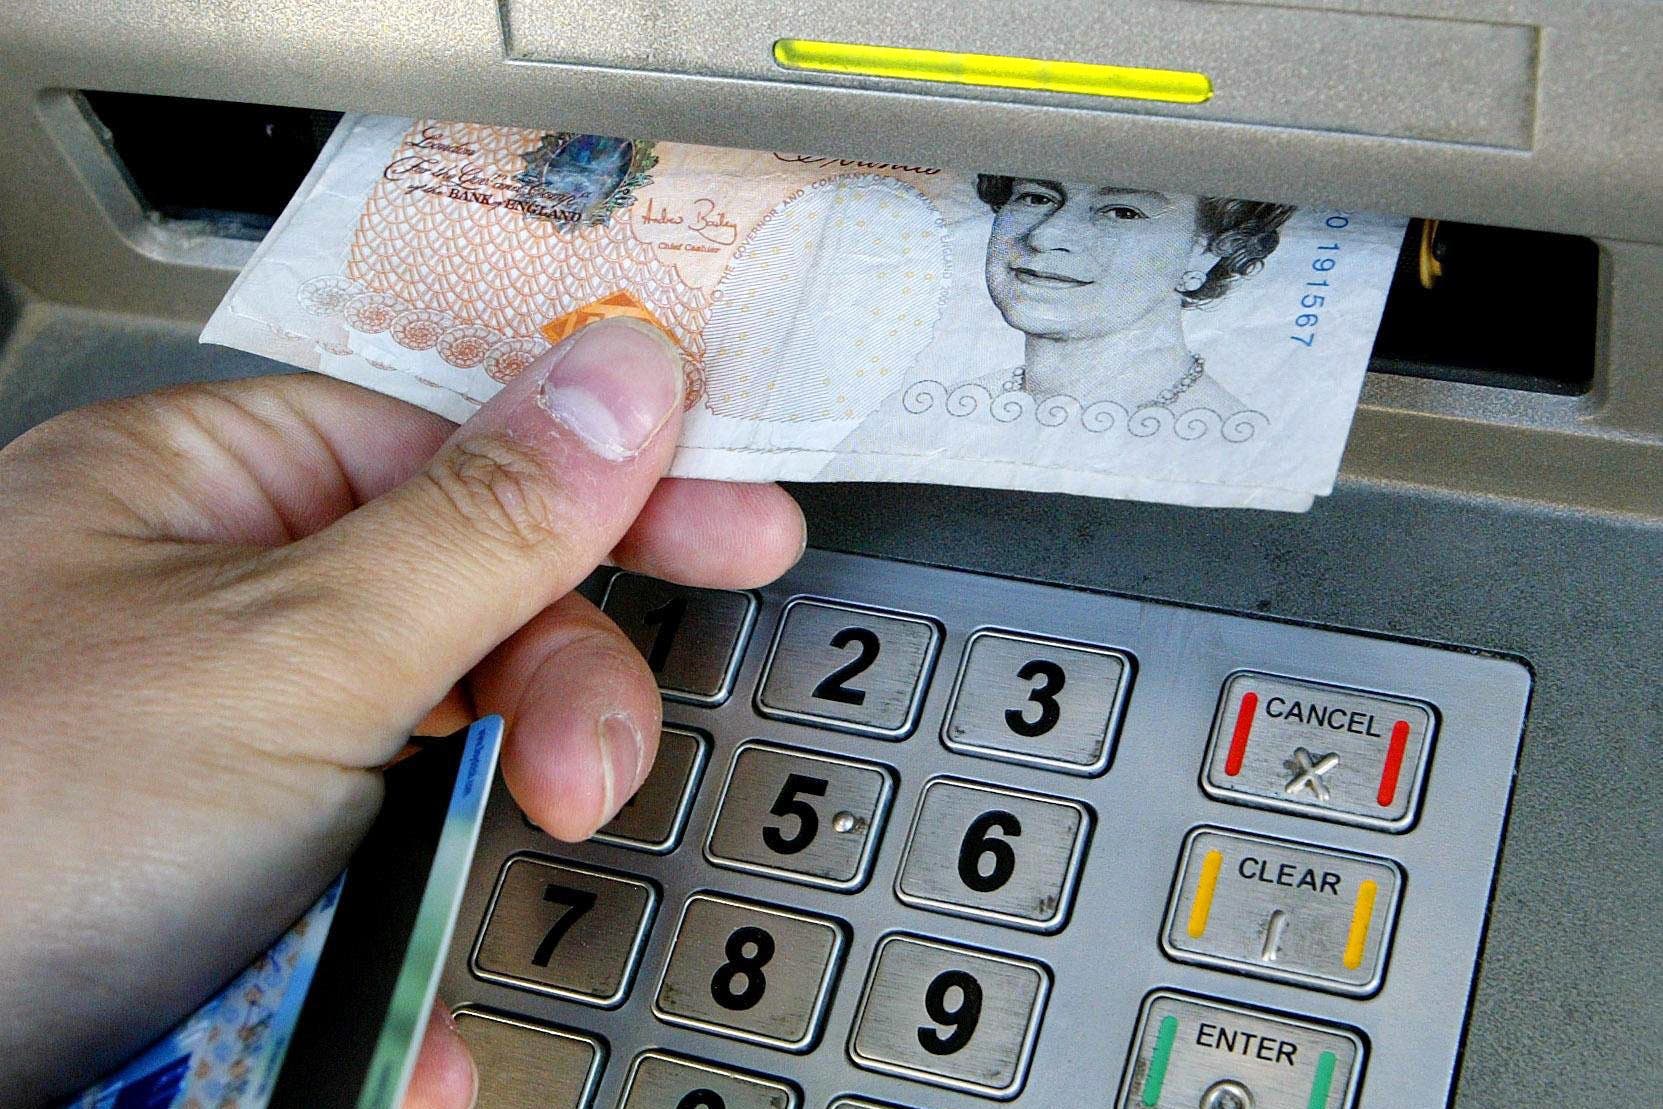 Plans to allow people to deposit at multiple banks using a single ATM are being trialled (Gareth Fuller/PA)